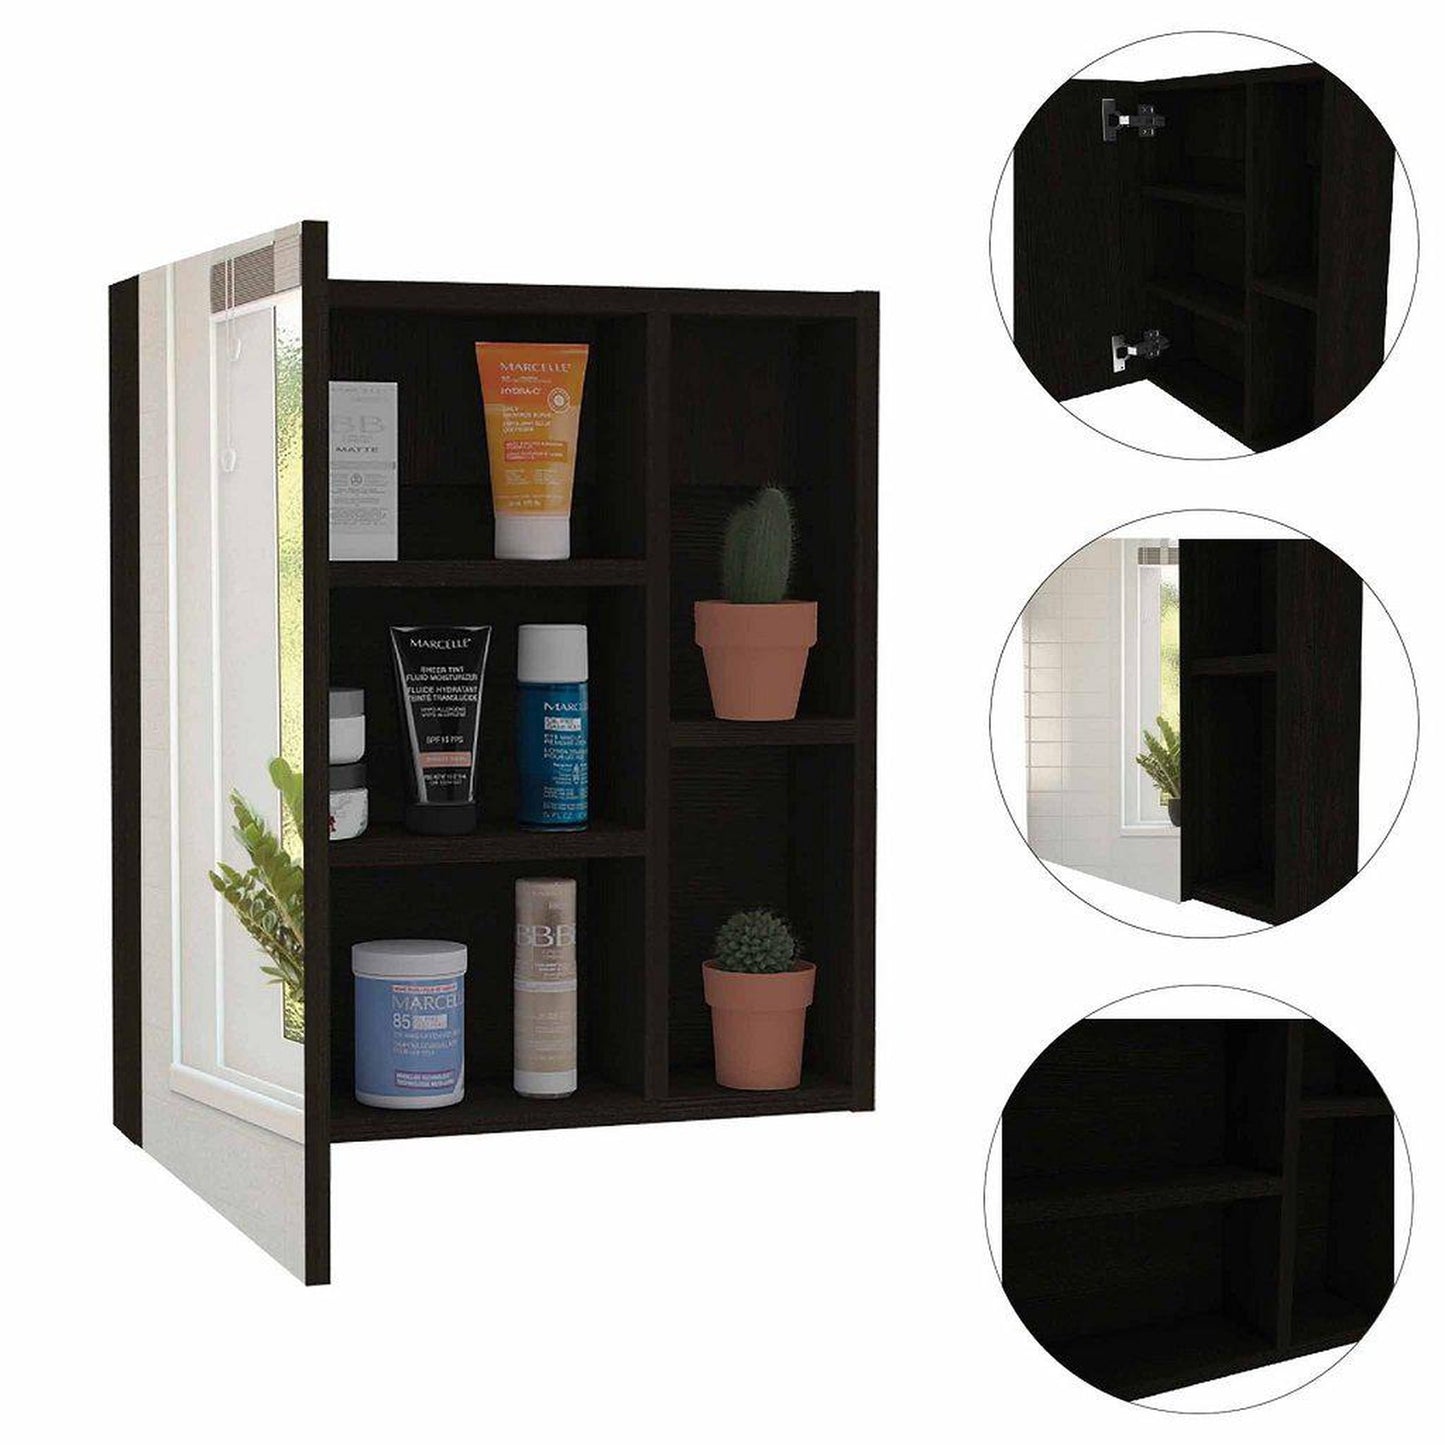 TUHOME Labelle 18" x 20" Black Wengue Wall-Mounted Mirror Medicine Cabinet With 2 Open Shelves